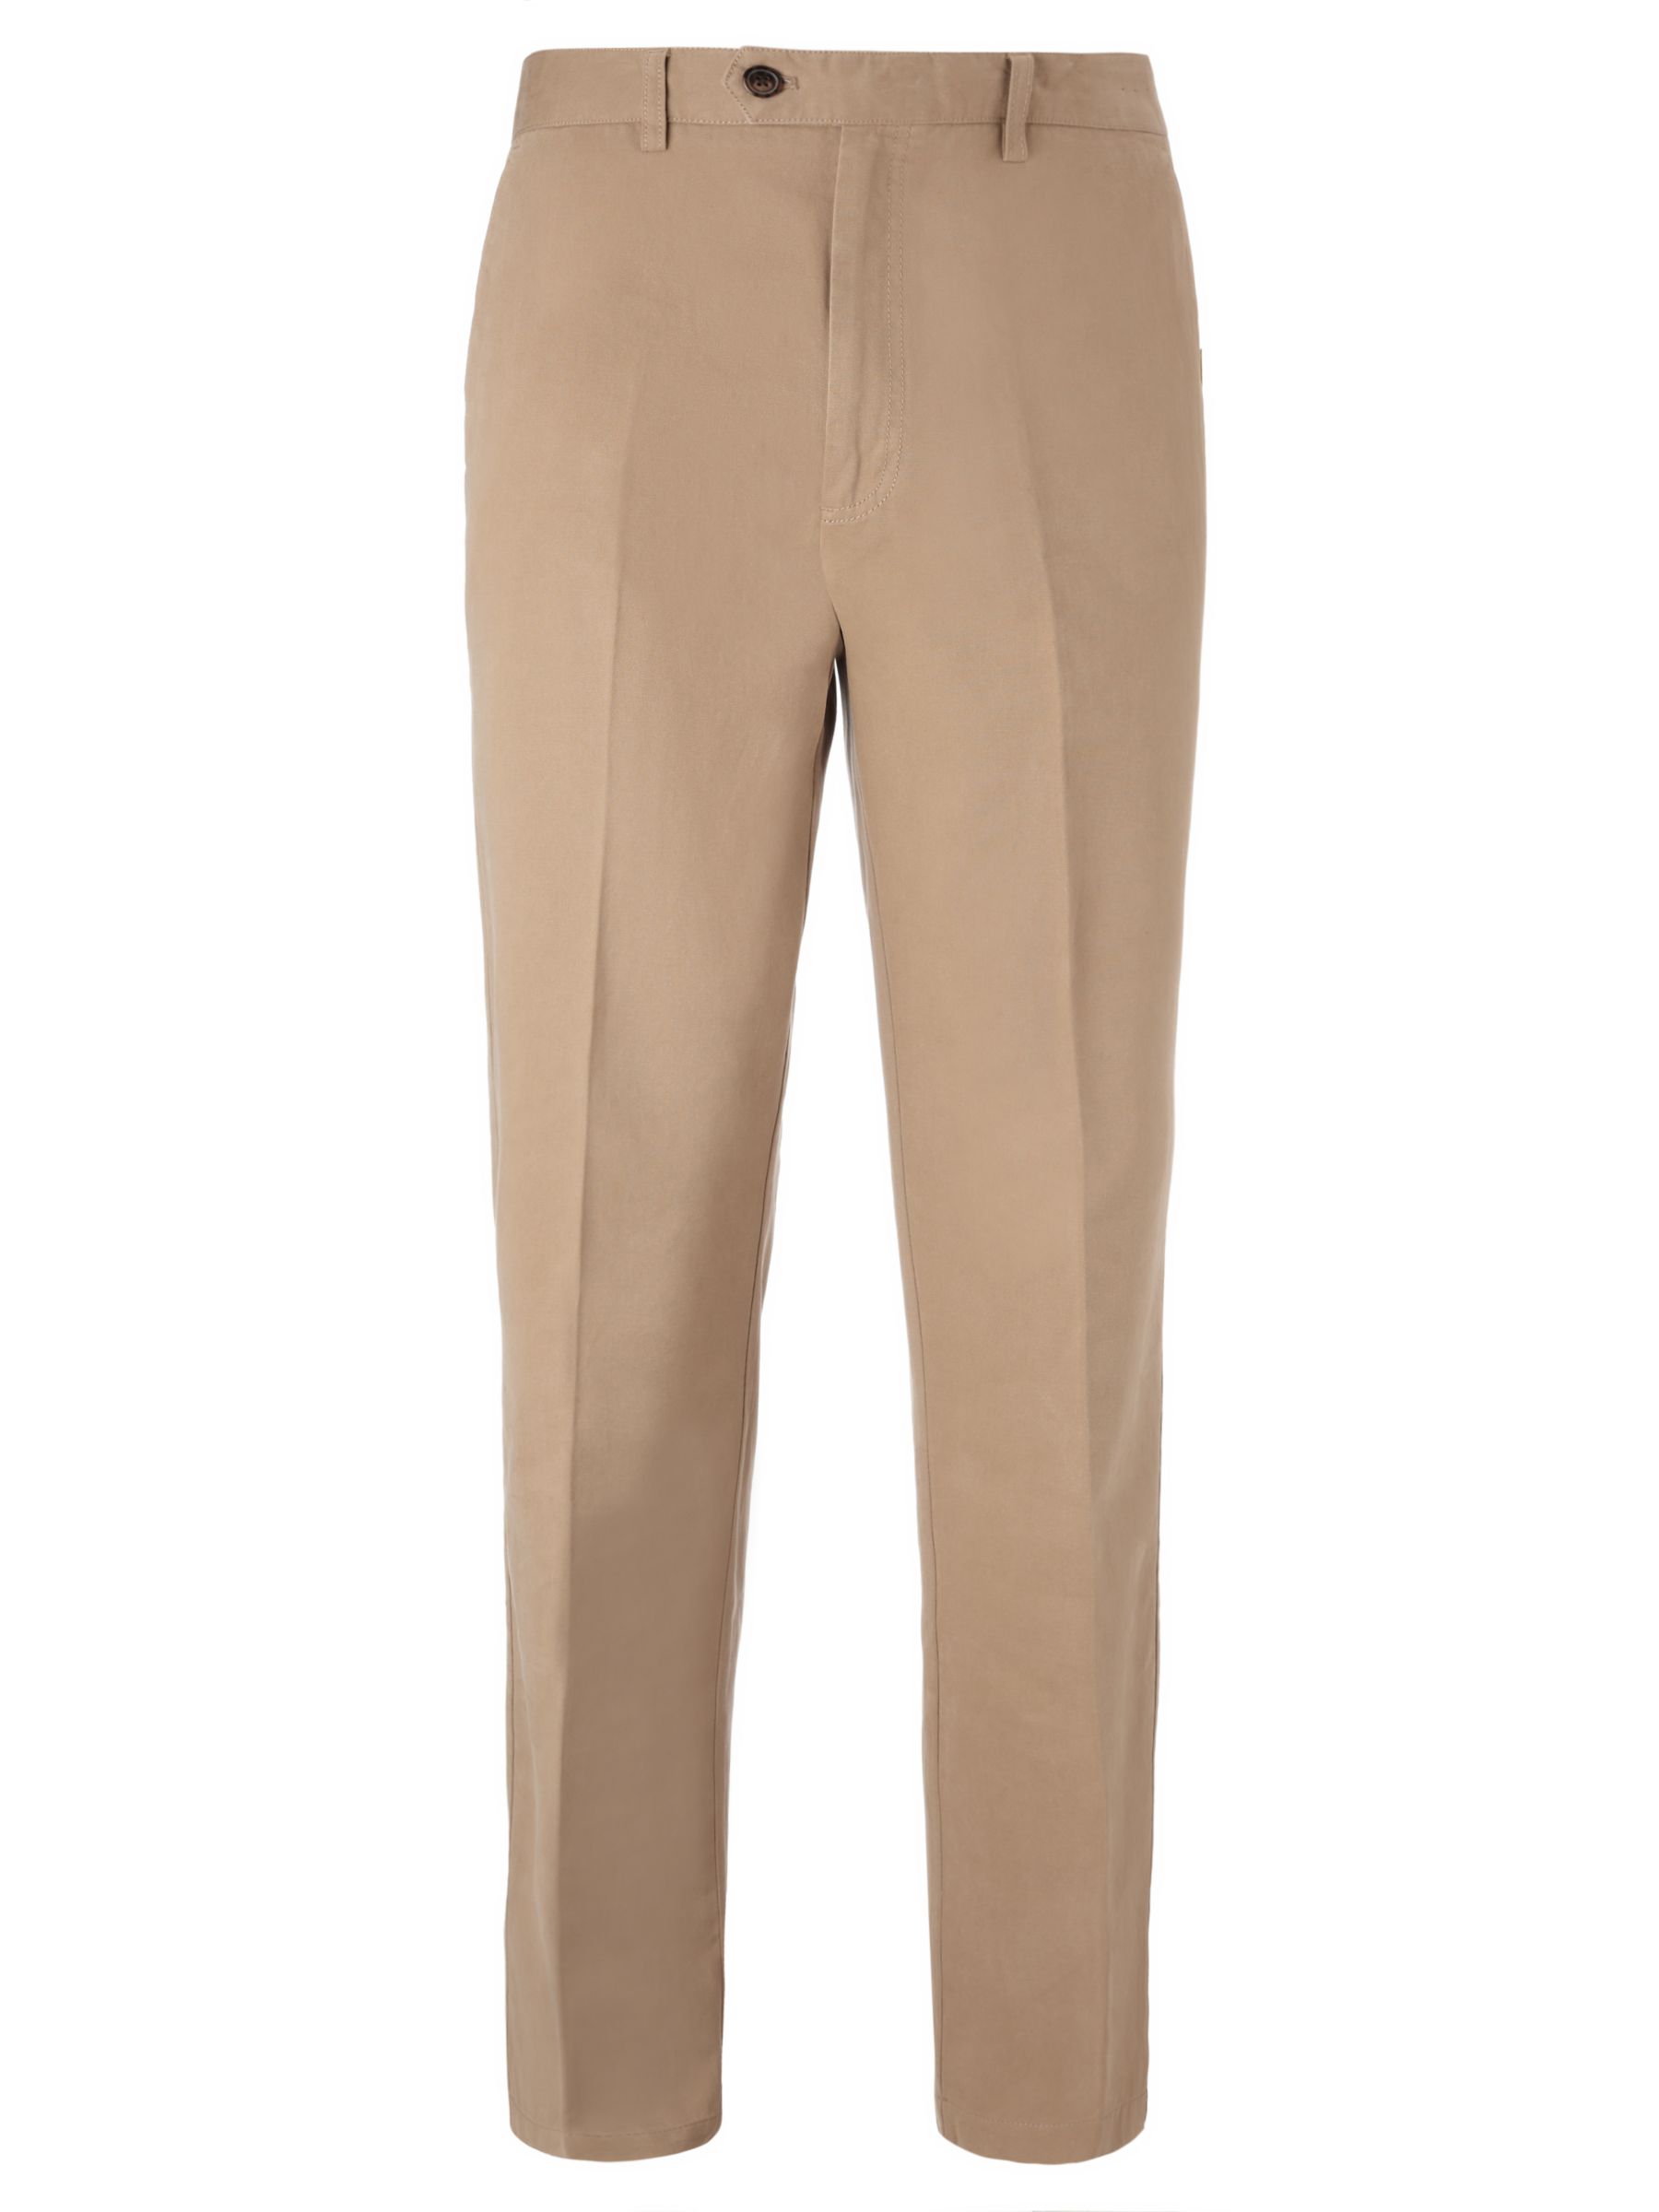 John Lewis & Partners Wrinkle Free Flat Front Trousers, Stone, 38L